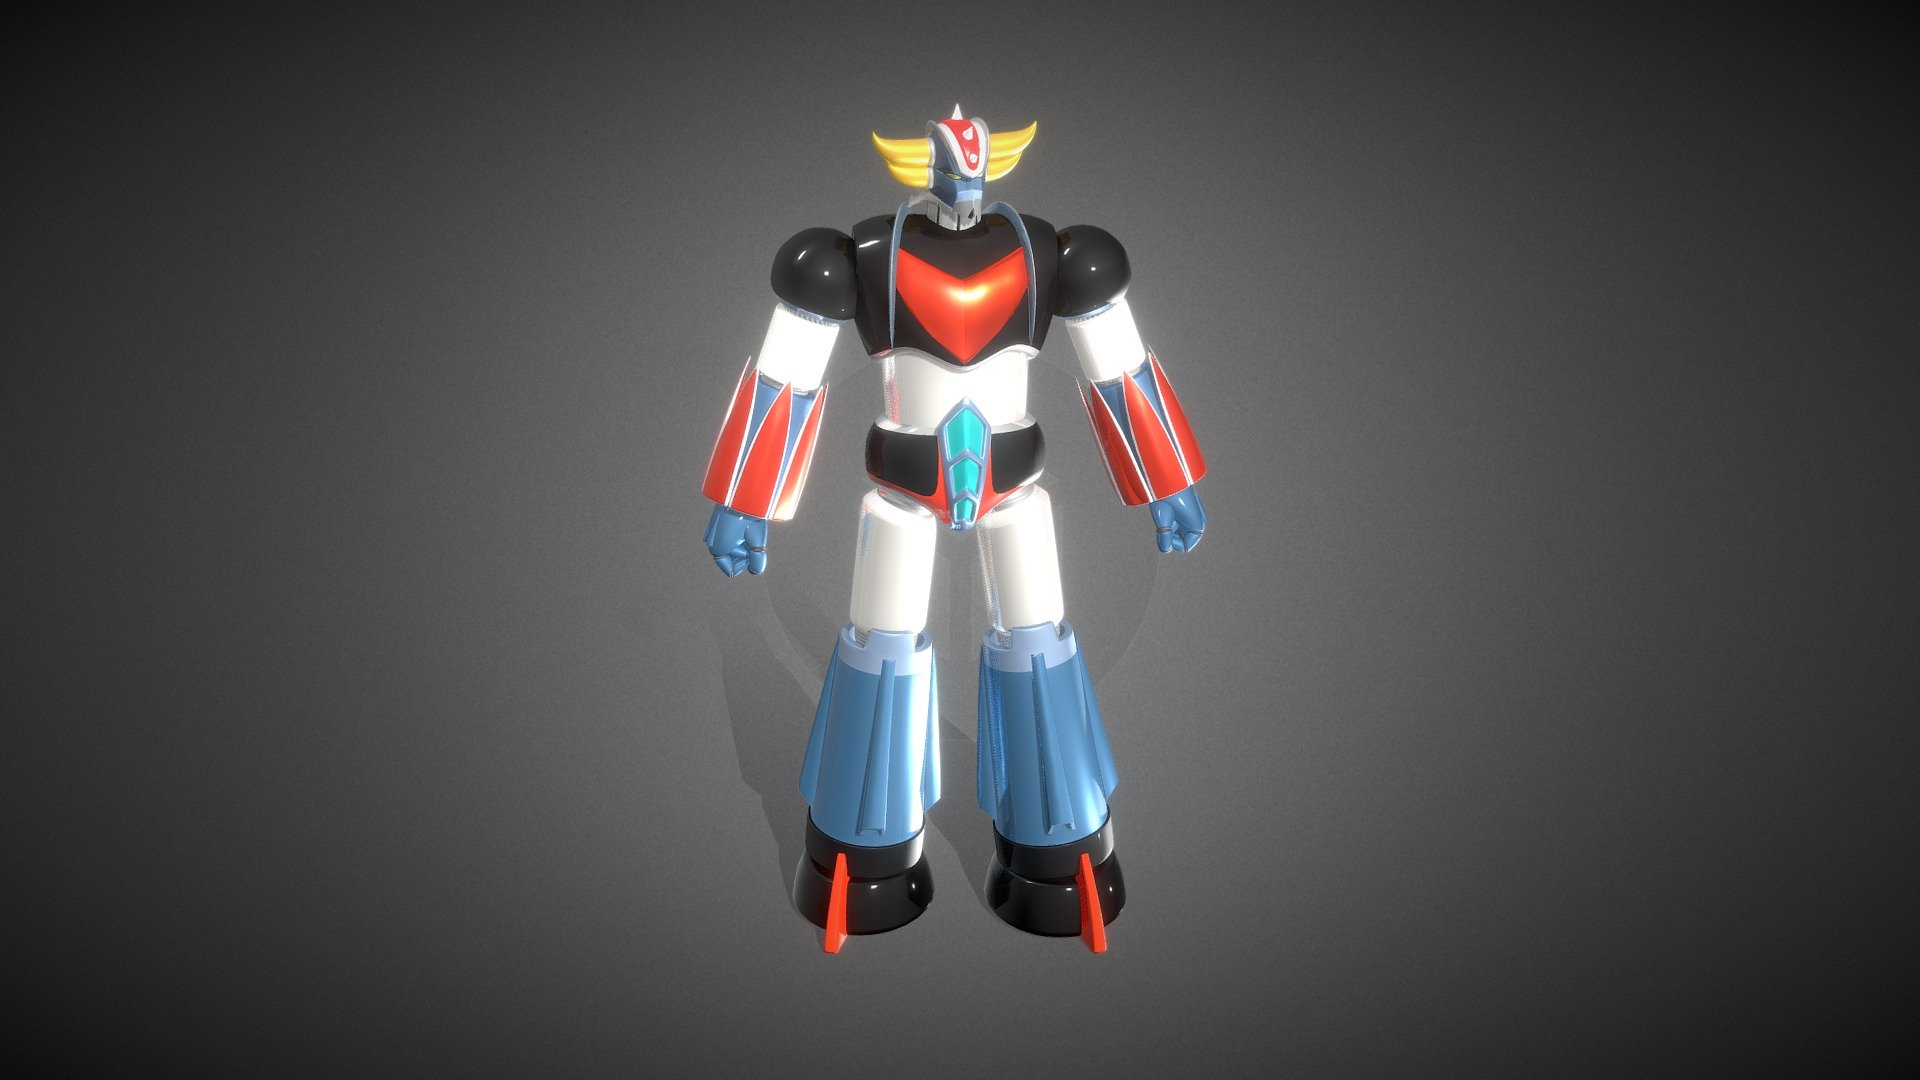 Grendizer inspired by 70's anime series created by Gō Nagai. Mesh modeled with lightwave 3d using image from web as reference - Grendizer - 3D model by pietroraggio78 3d model